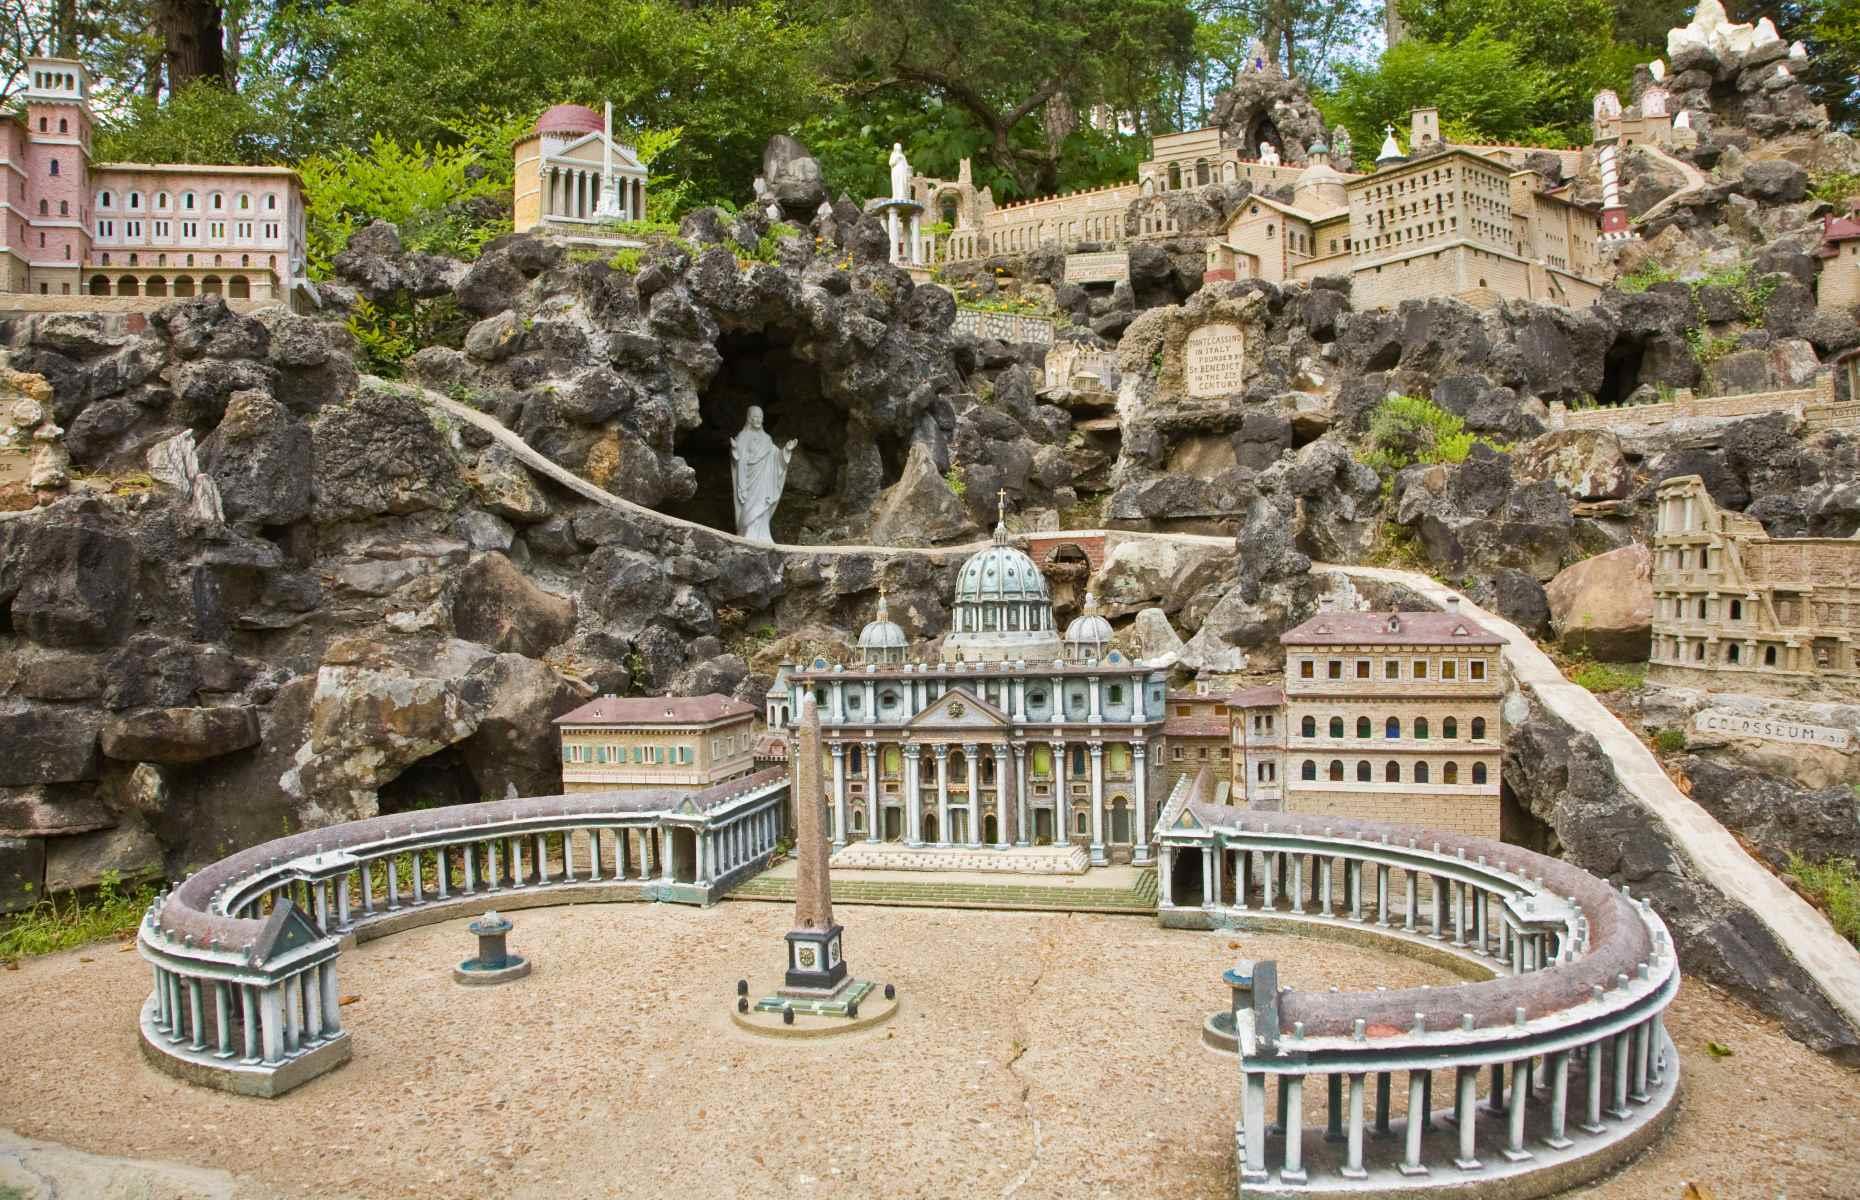 <p>To describe the Ave Maria Grotto as intricate would be an understatement. To describe its creator, Benedictine monk Brother Joseph Zoett, as dedicated would be even more so.</p>  <p>The park in Cullman, which opened in 1934, has 125 stone and cement structures depicting biblical passages, shrines, and miniature replicas of famous religious buildings including St Peter's Basilica and Lourdes Basilica Church.</p>